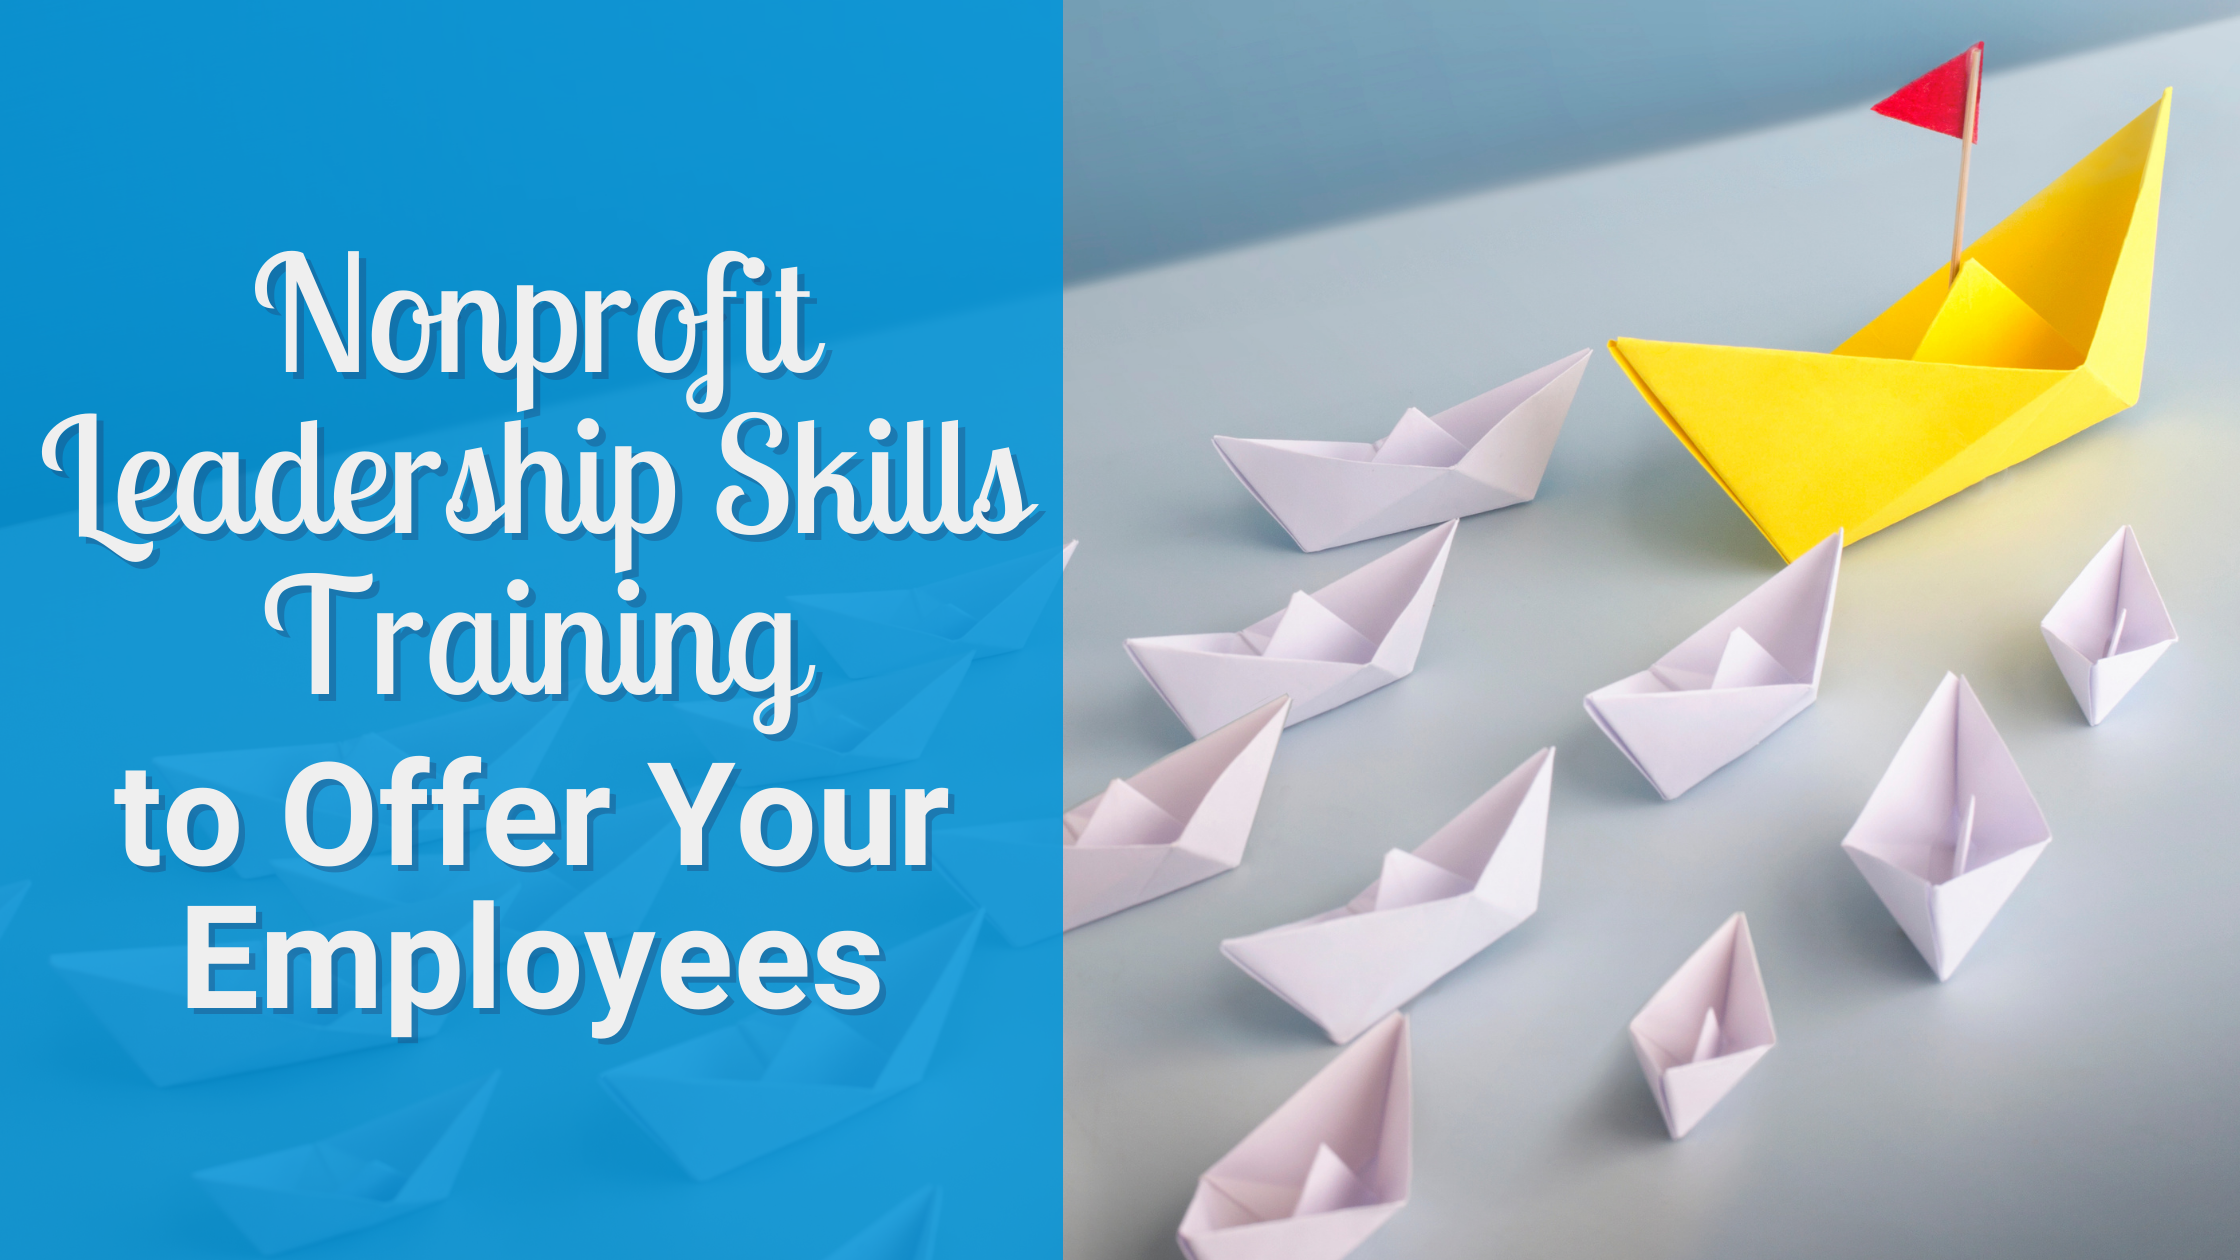 Nonprofit Leadership Skills Training to Offer Your Employees_Header